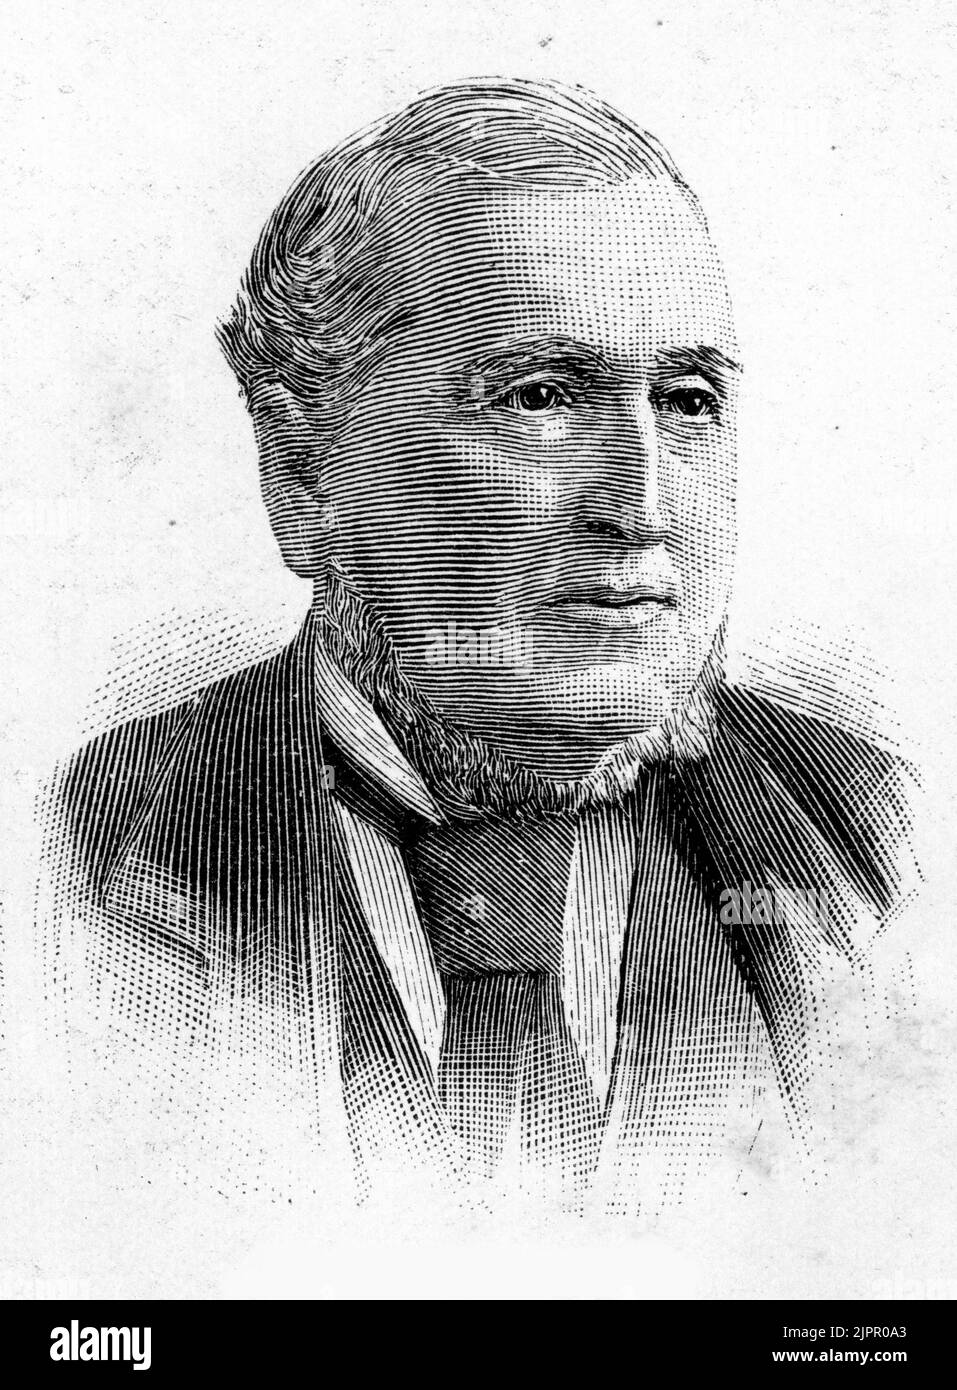 Engraved portrait of Sir John Arnott, , 1st Baronet JP (1814 - 1898) Scottish-Irish entrepreneur and a major figure in the commercial and political spheres of late-19th century Cork. He was also founder of the Arnotts department chain. Stock Photo